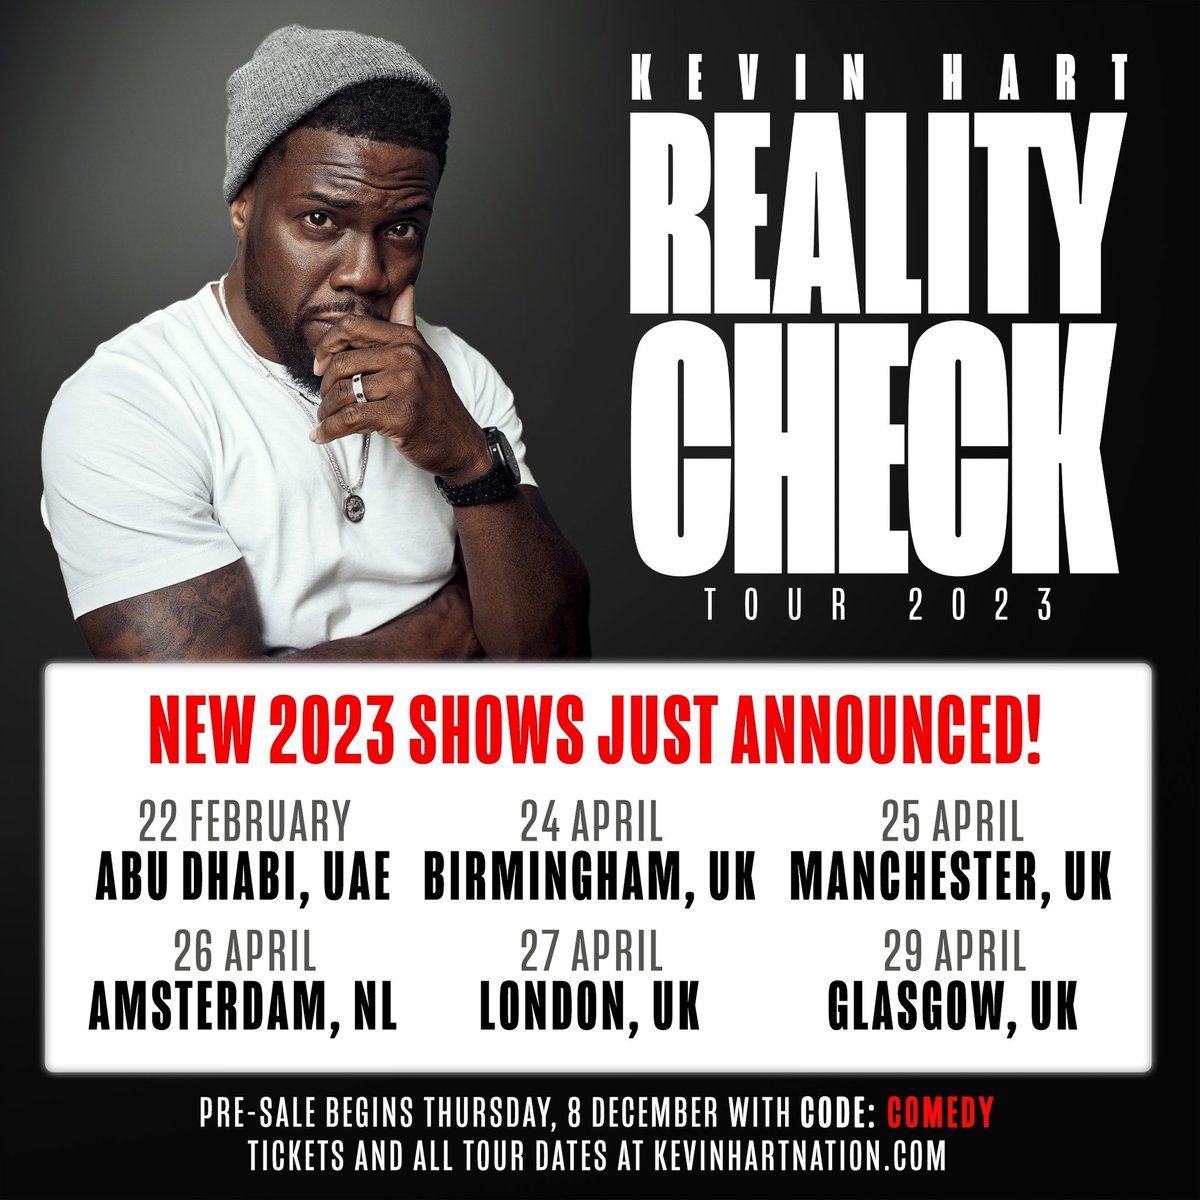 Reality Check Tour is coming to UK/Europe and Abu Dhabi in 2023!!!!! Grab pre-sale tickets this Thursday with code COMEDY before Friday’s general on sale. Tickets and all tour dates at KEVINHARTNATION.COM! LET’S GO!!!! #RealityCheckTour #ComedicRockStarShit